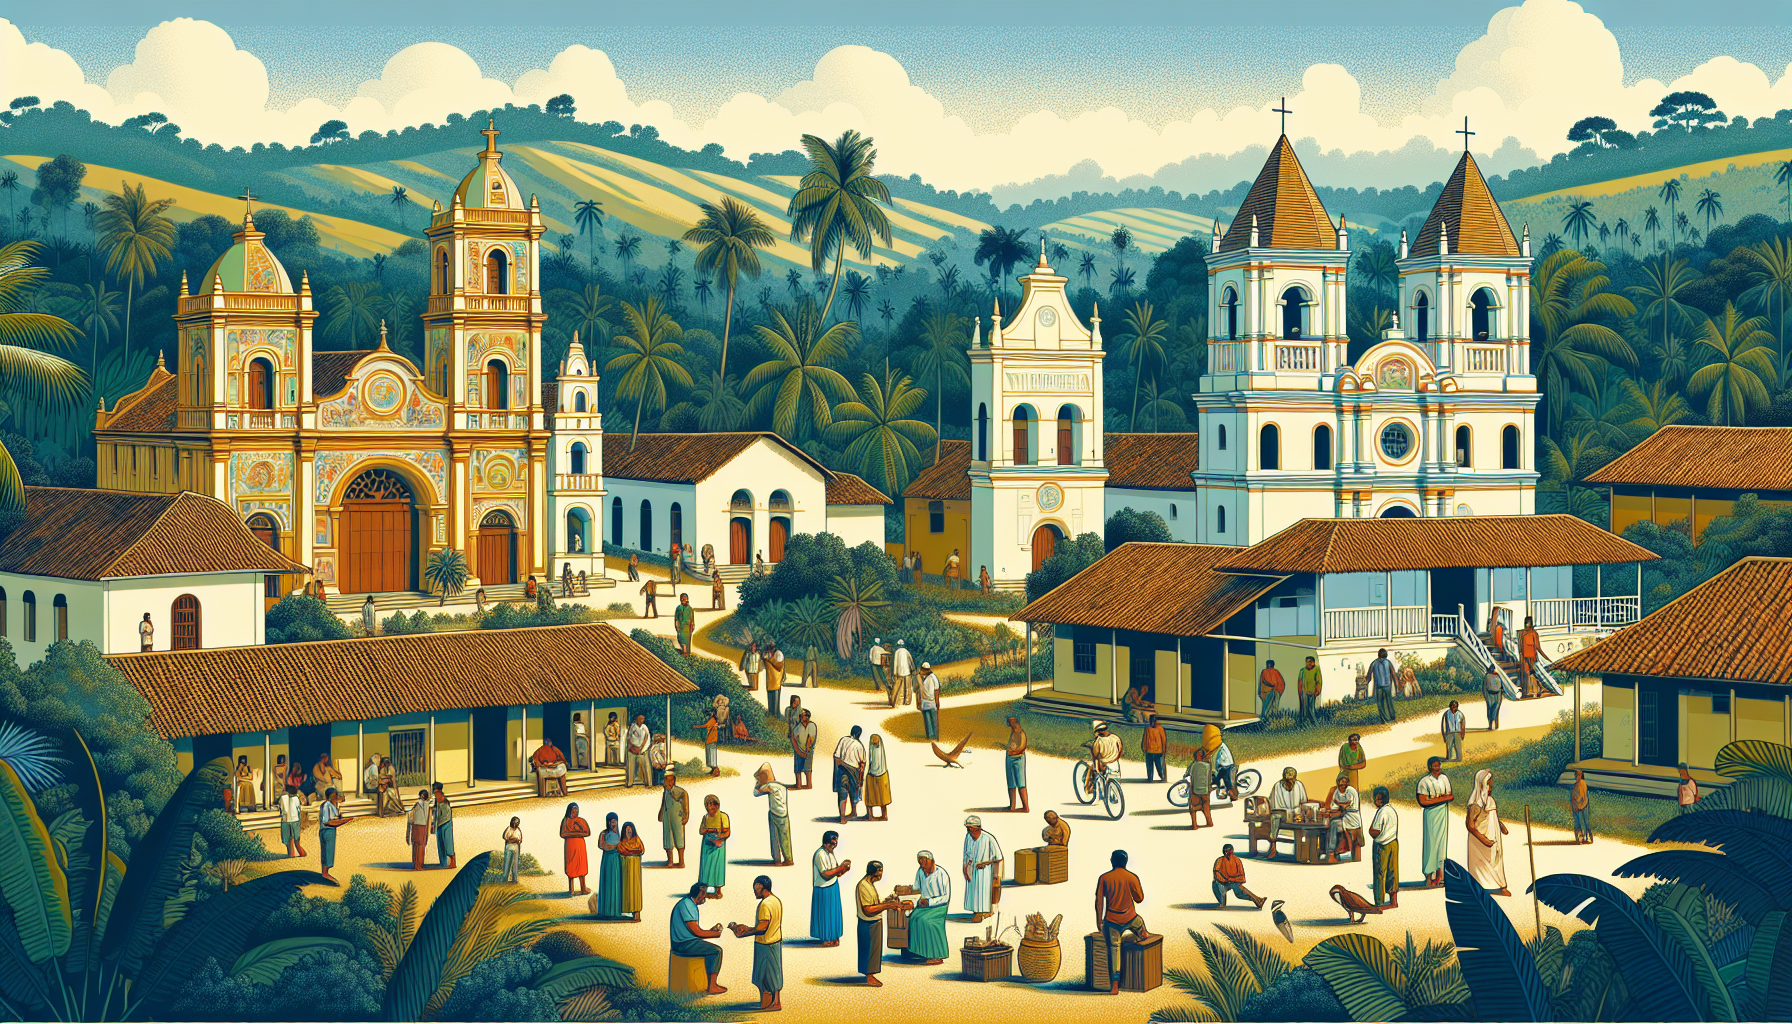 Create a detailed and vibrant image of various Christian churches in Villavicencio, Colombia, set against a lush, tropical background. Highlight diverse architectural styles, including traditional and